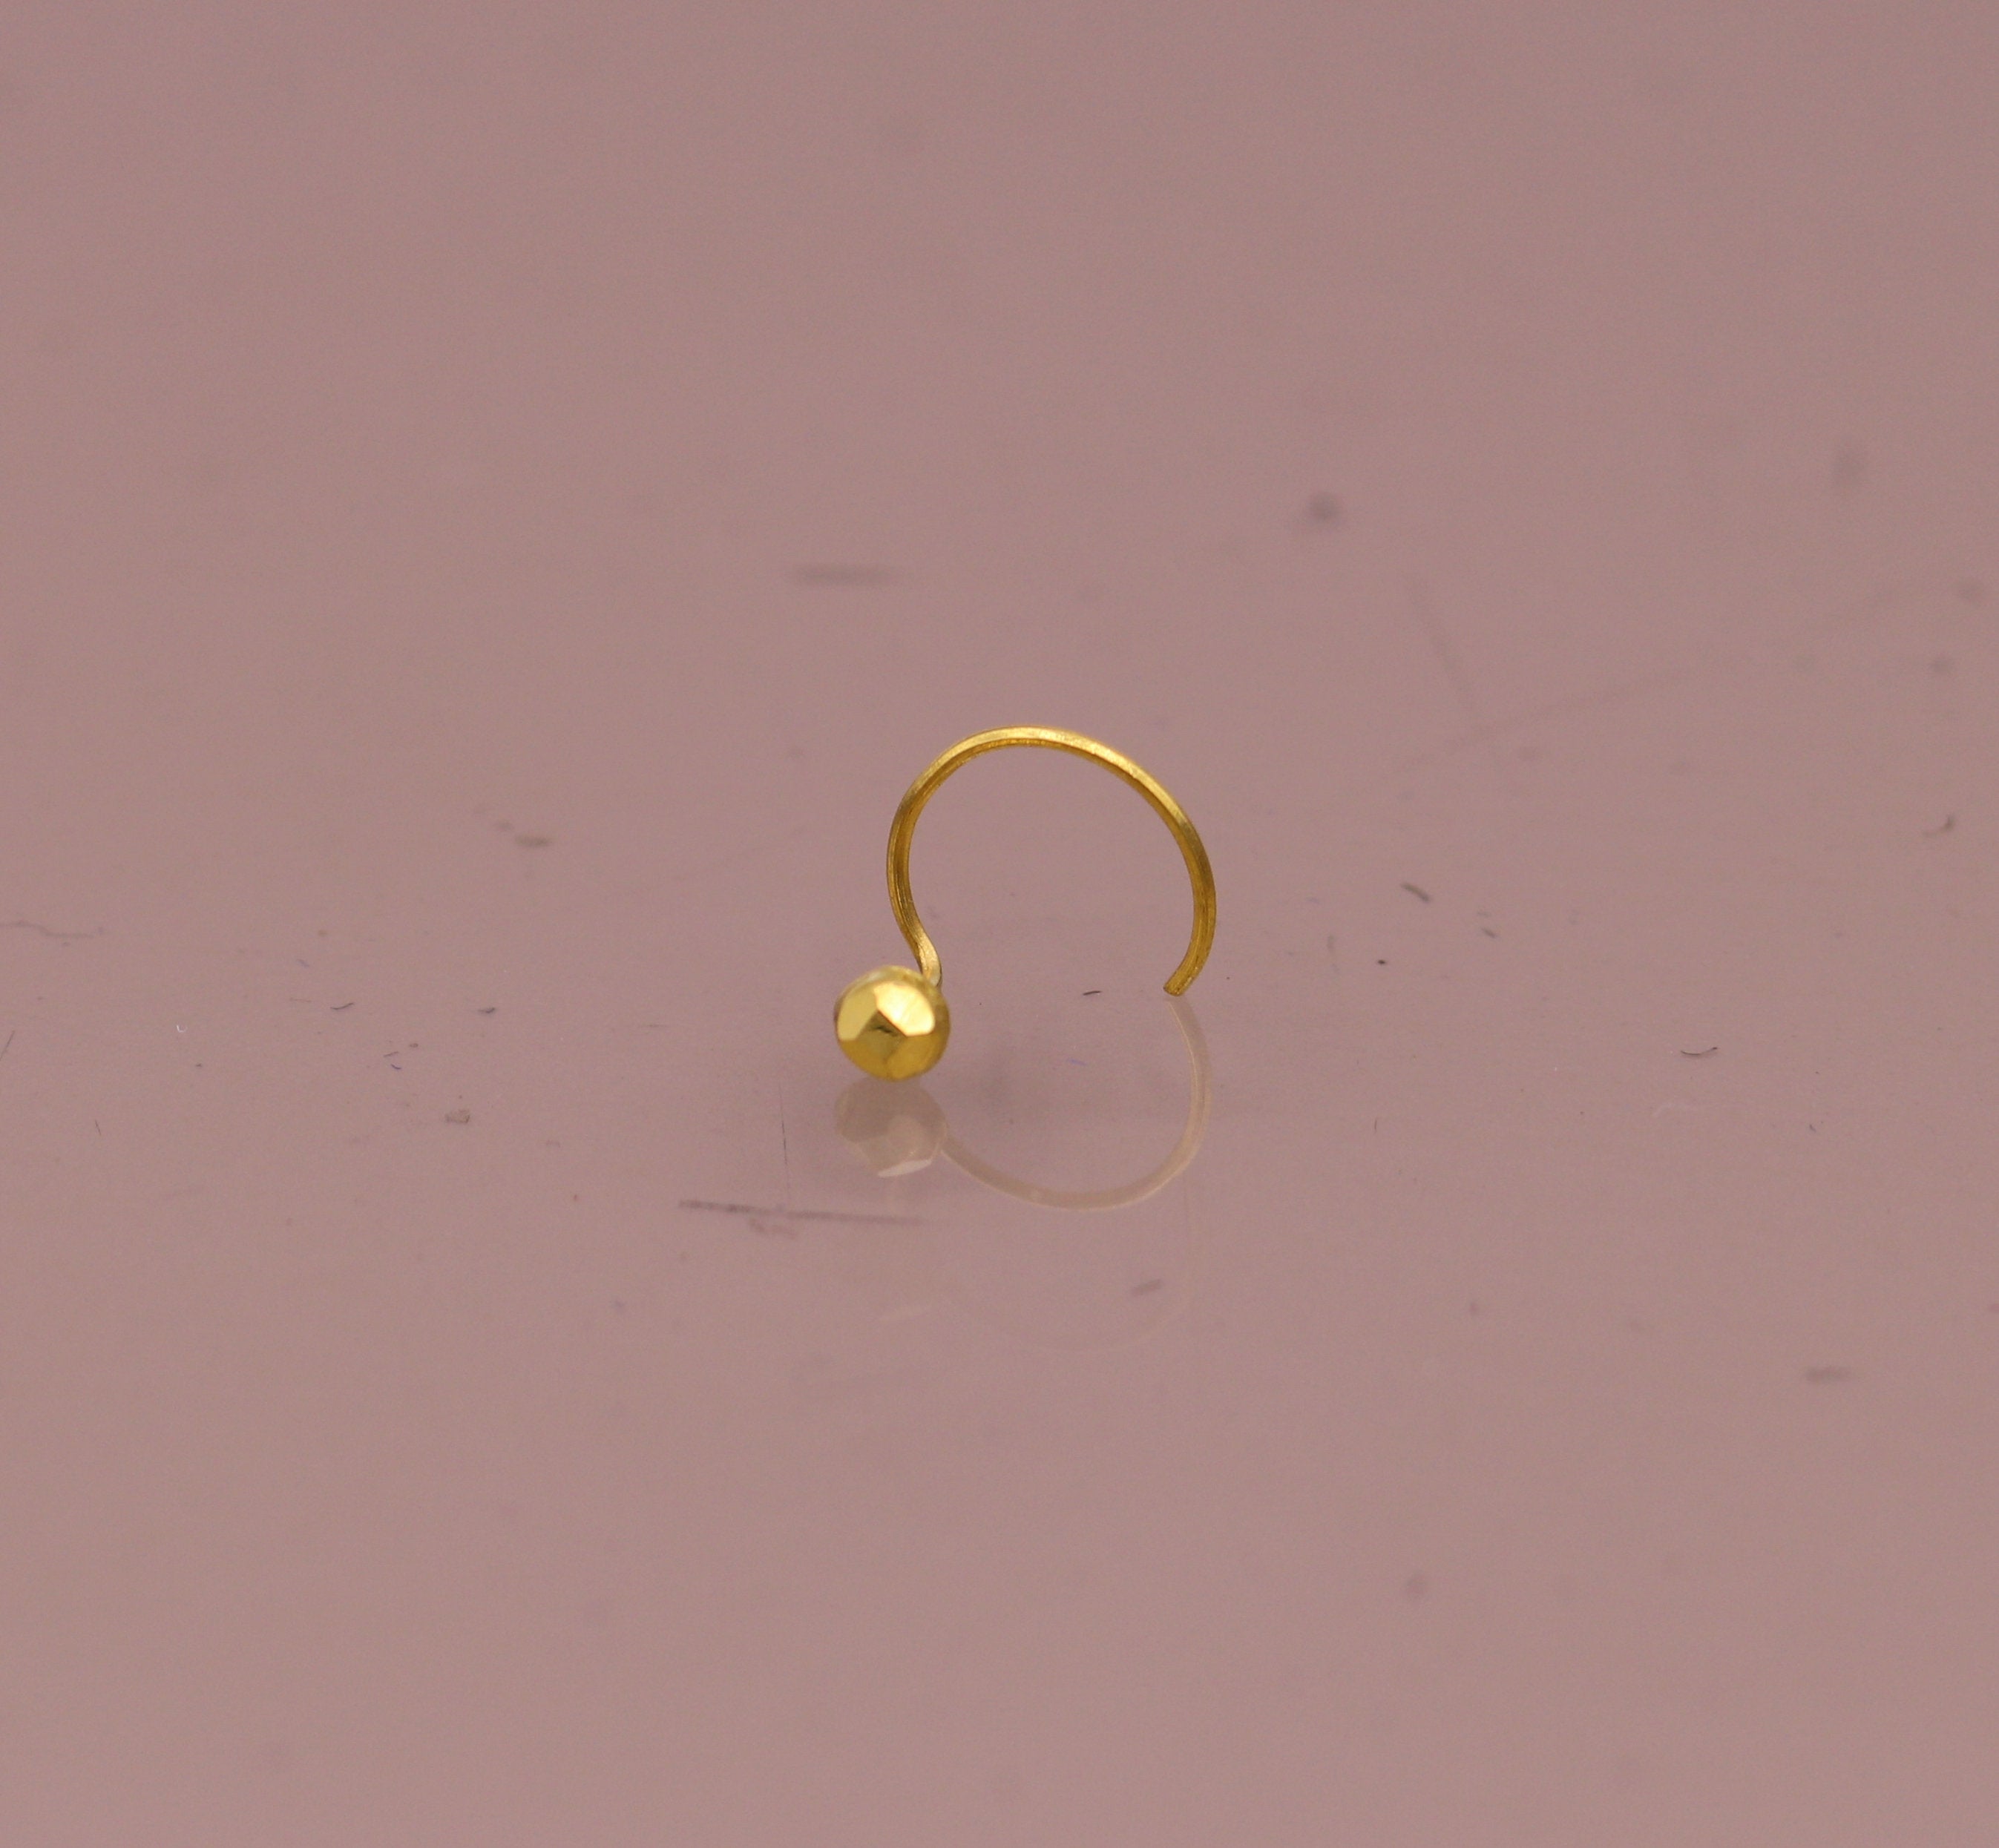 Small Nose Ring Indian Piercing Nath Fashion Jewelry Gold Plated Hoop  Crystal | eBay